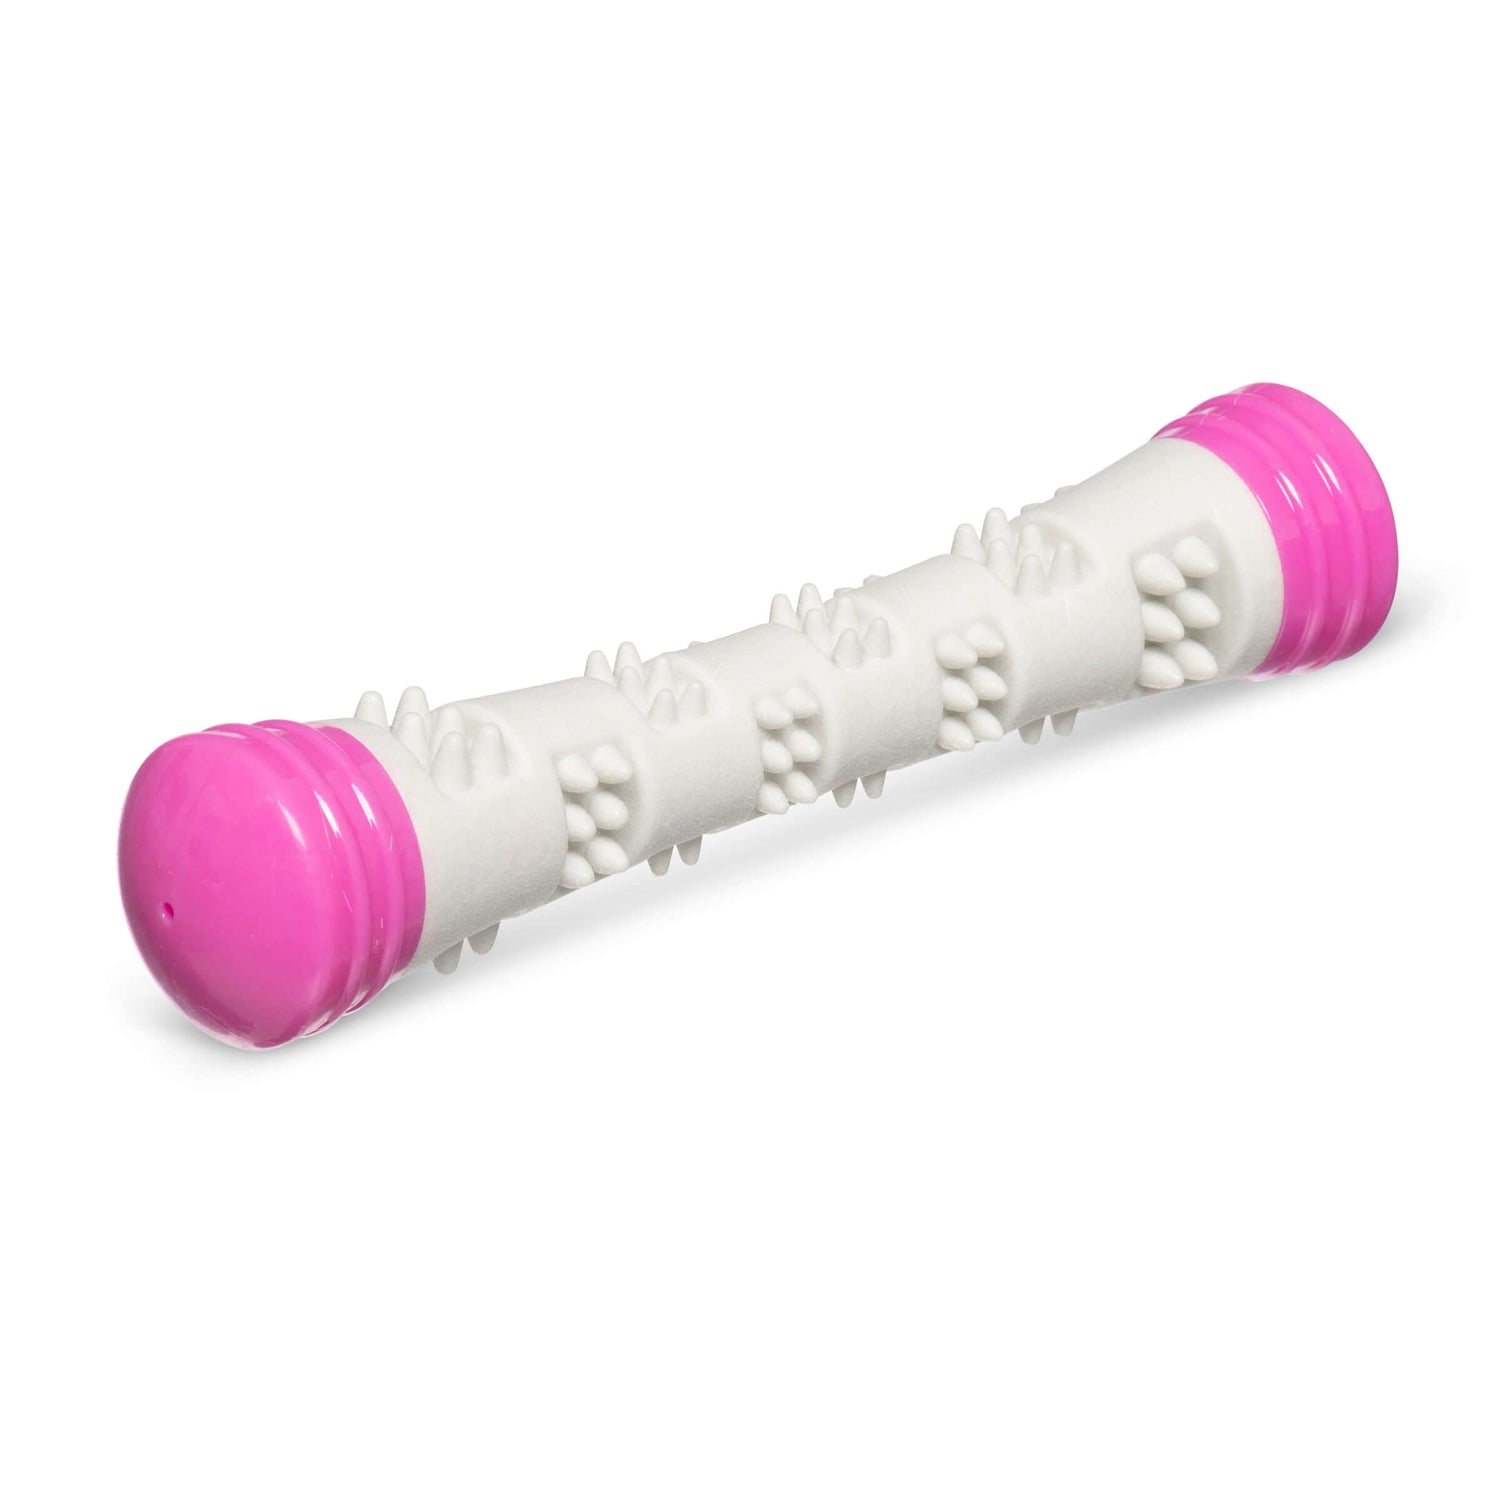 Durable small stick dog toy.  8.5 inches.  great squeakers and bristles for teeth cleaning. 